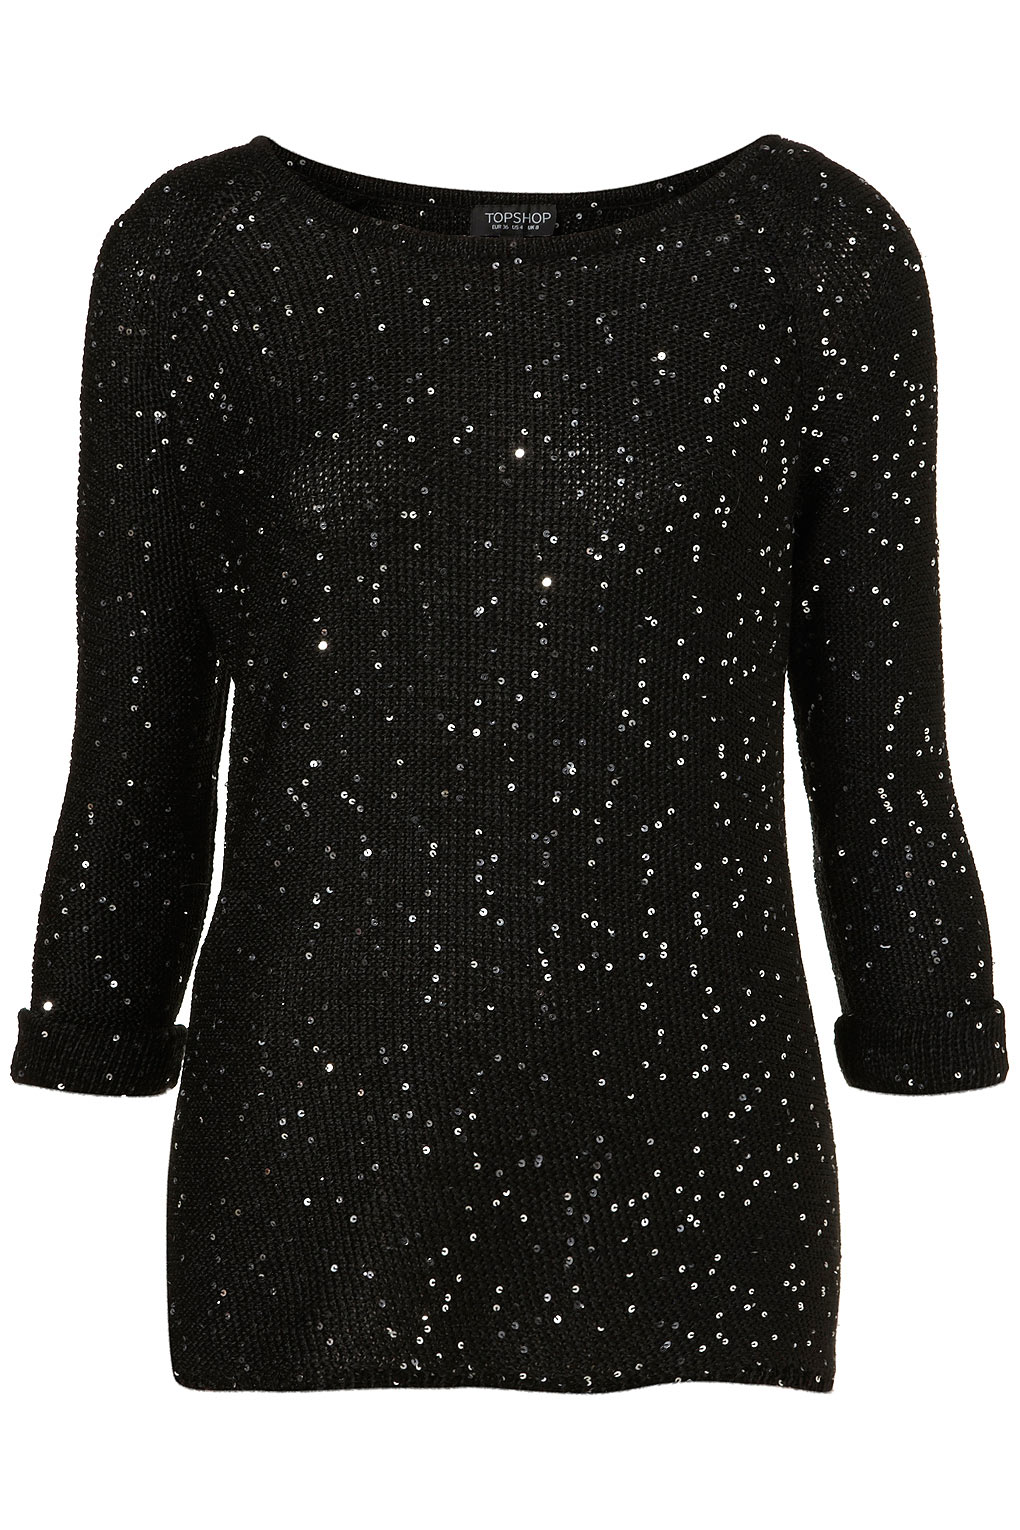 Lyst - Topshop Knitted Sequin Jumper in Black